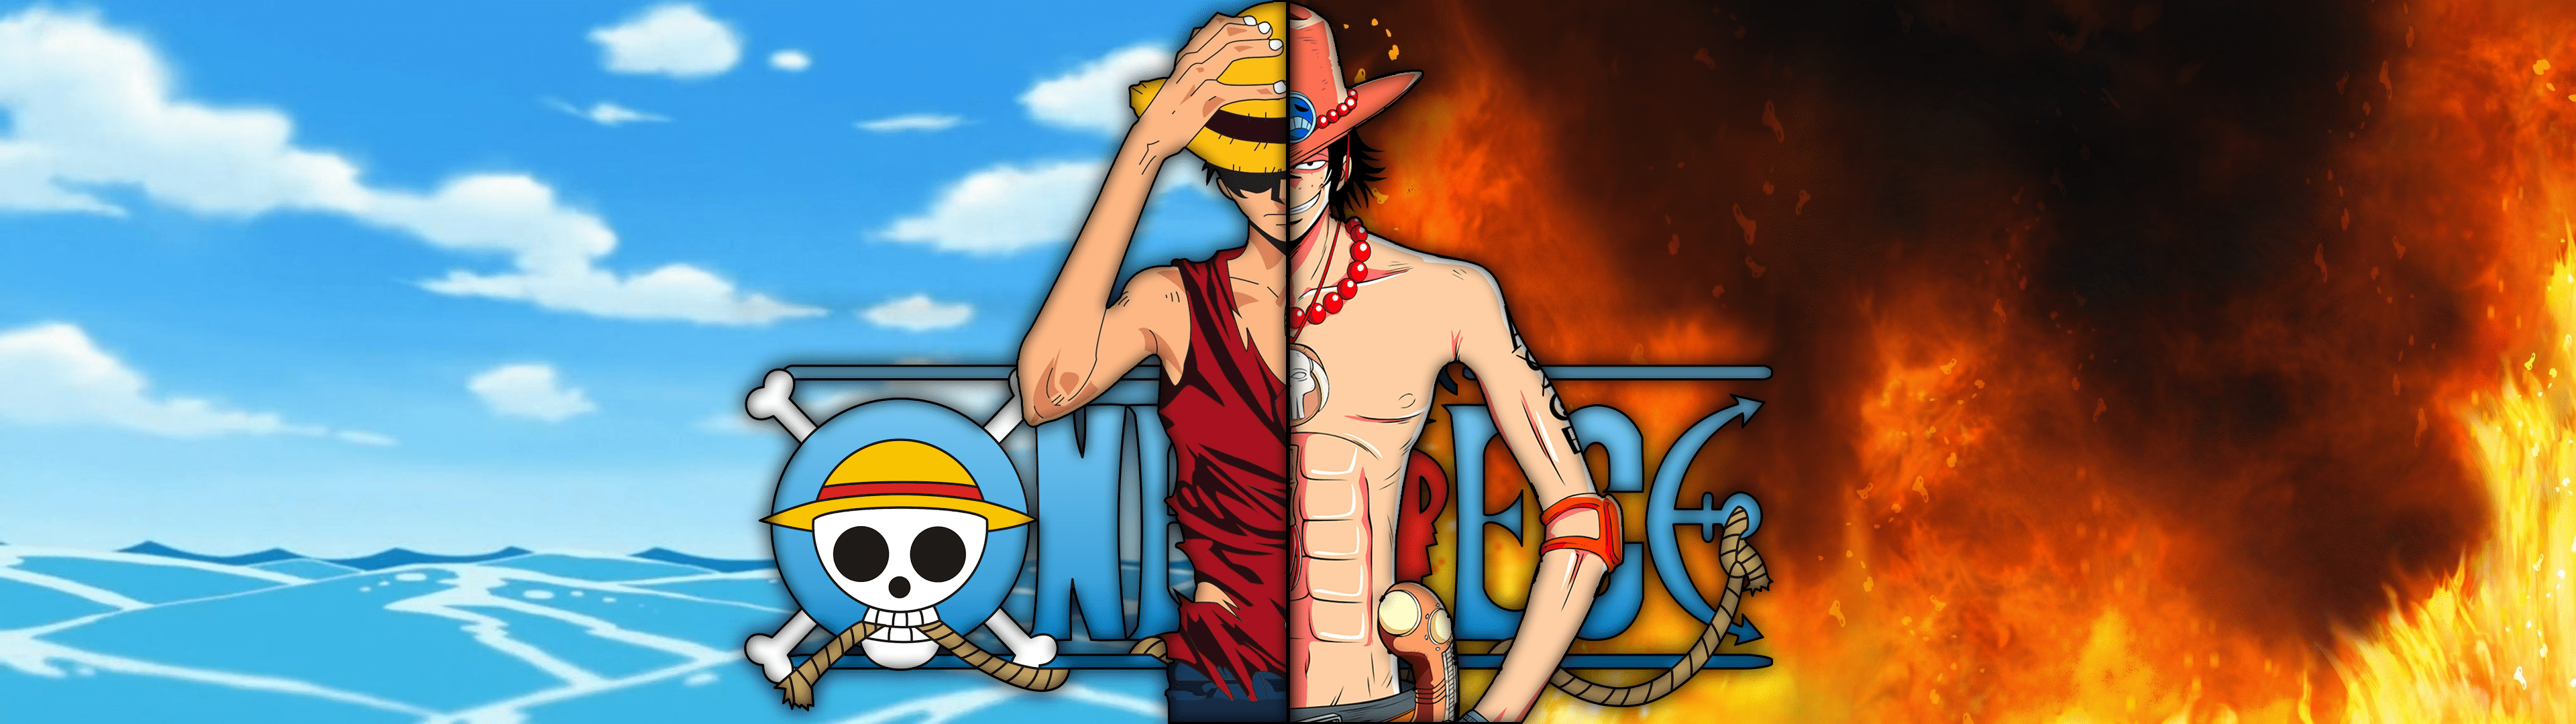 3840x1080 One Piece Wallpapers Top Free 3840x1080 One Piece Backgrounds Wallpaperaccess